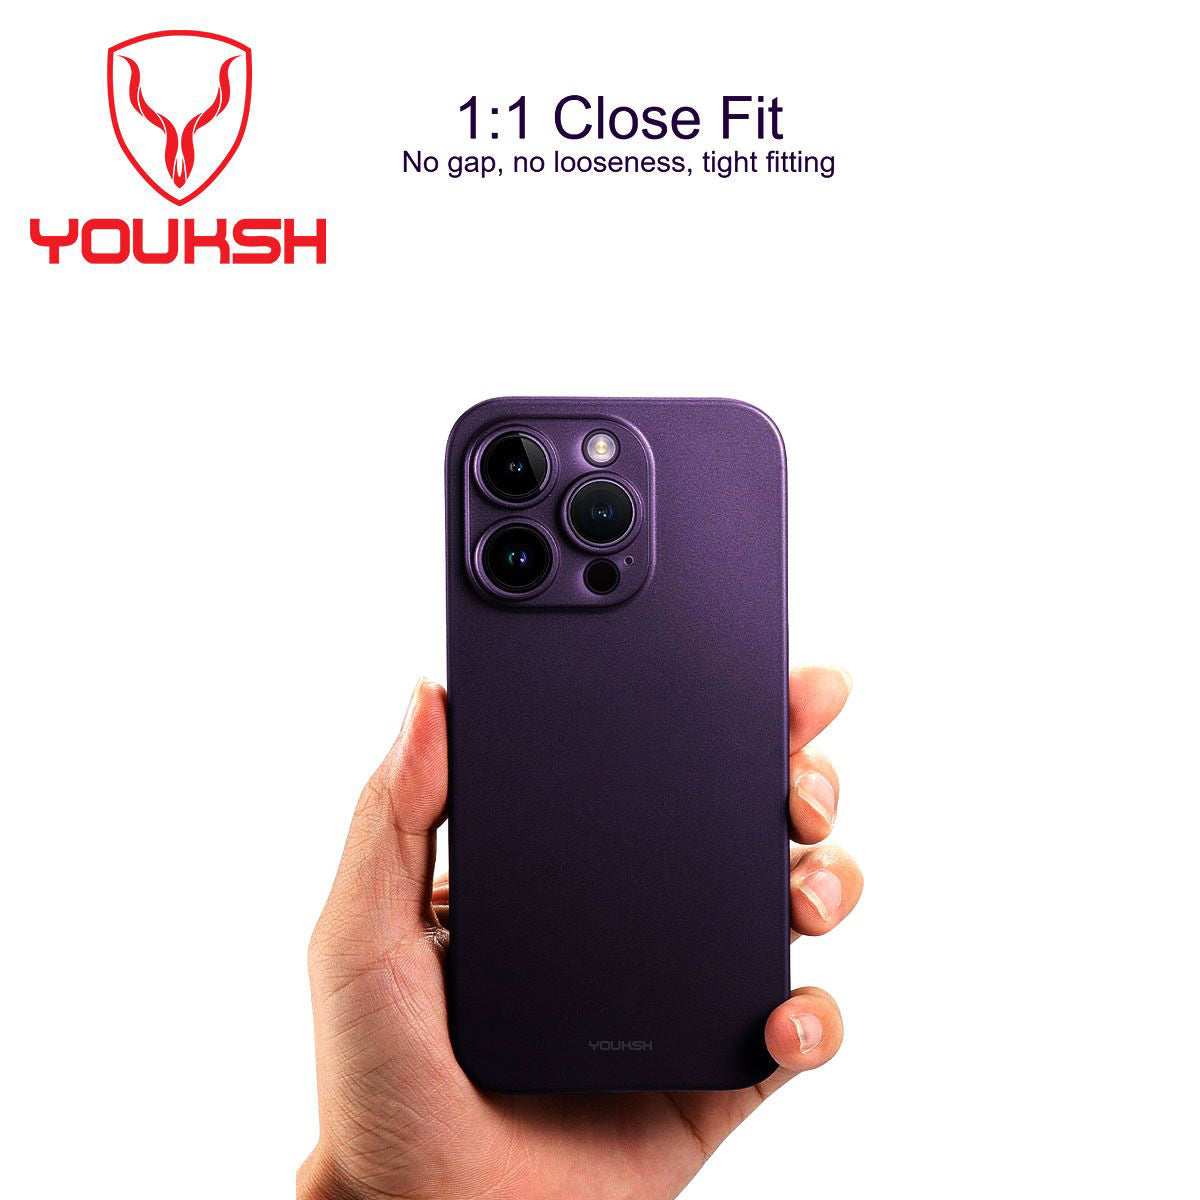 YOUKSH Apple Iphone 14 PRO Wing Case - Iphone 14 PRO Paper Case - Iphone 14 PRO (6.1) Ultra Thin Lightweight Back cover - Iphone 14 PRO Slim Smart Back Pouch - For Iphone 14 Series.(Deep Purple)